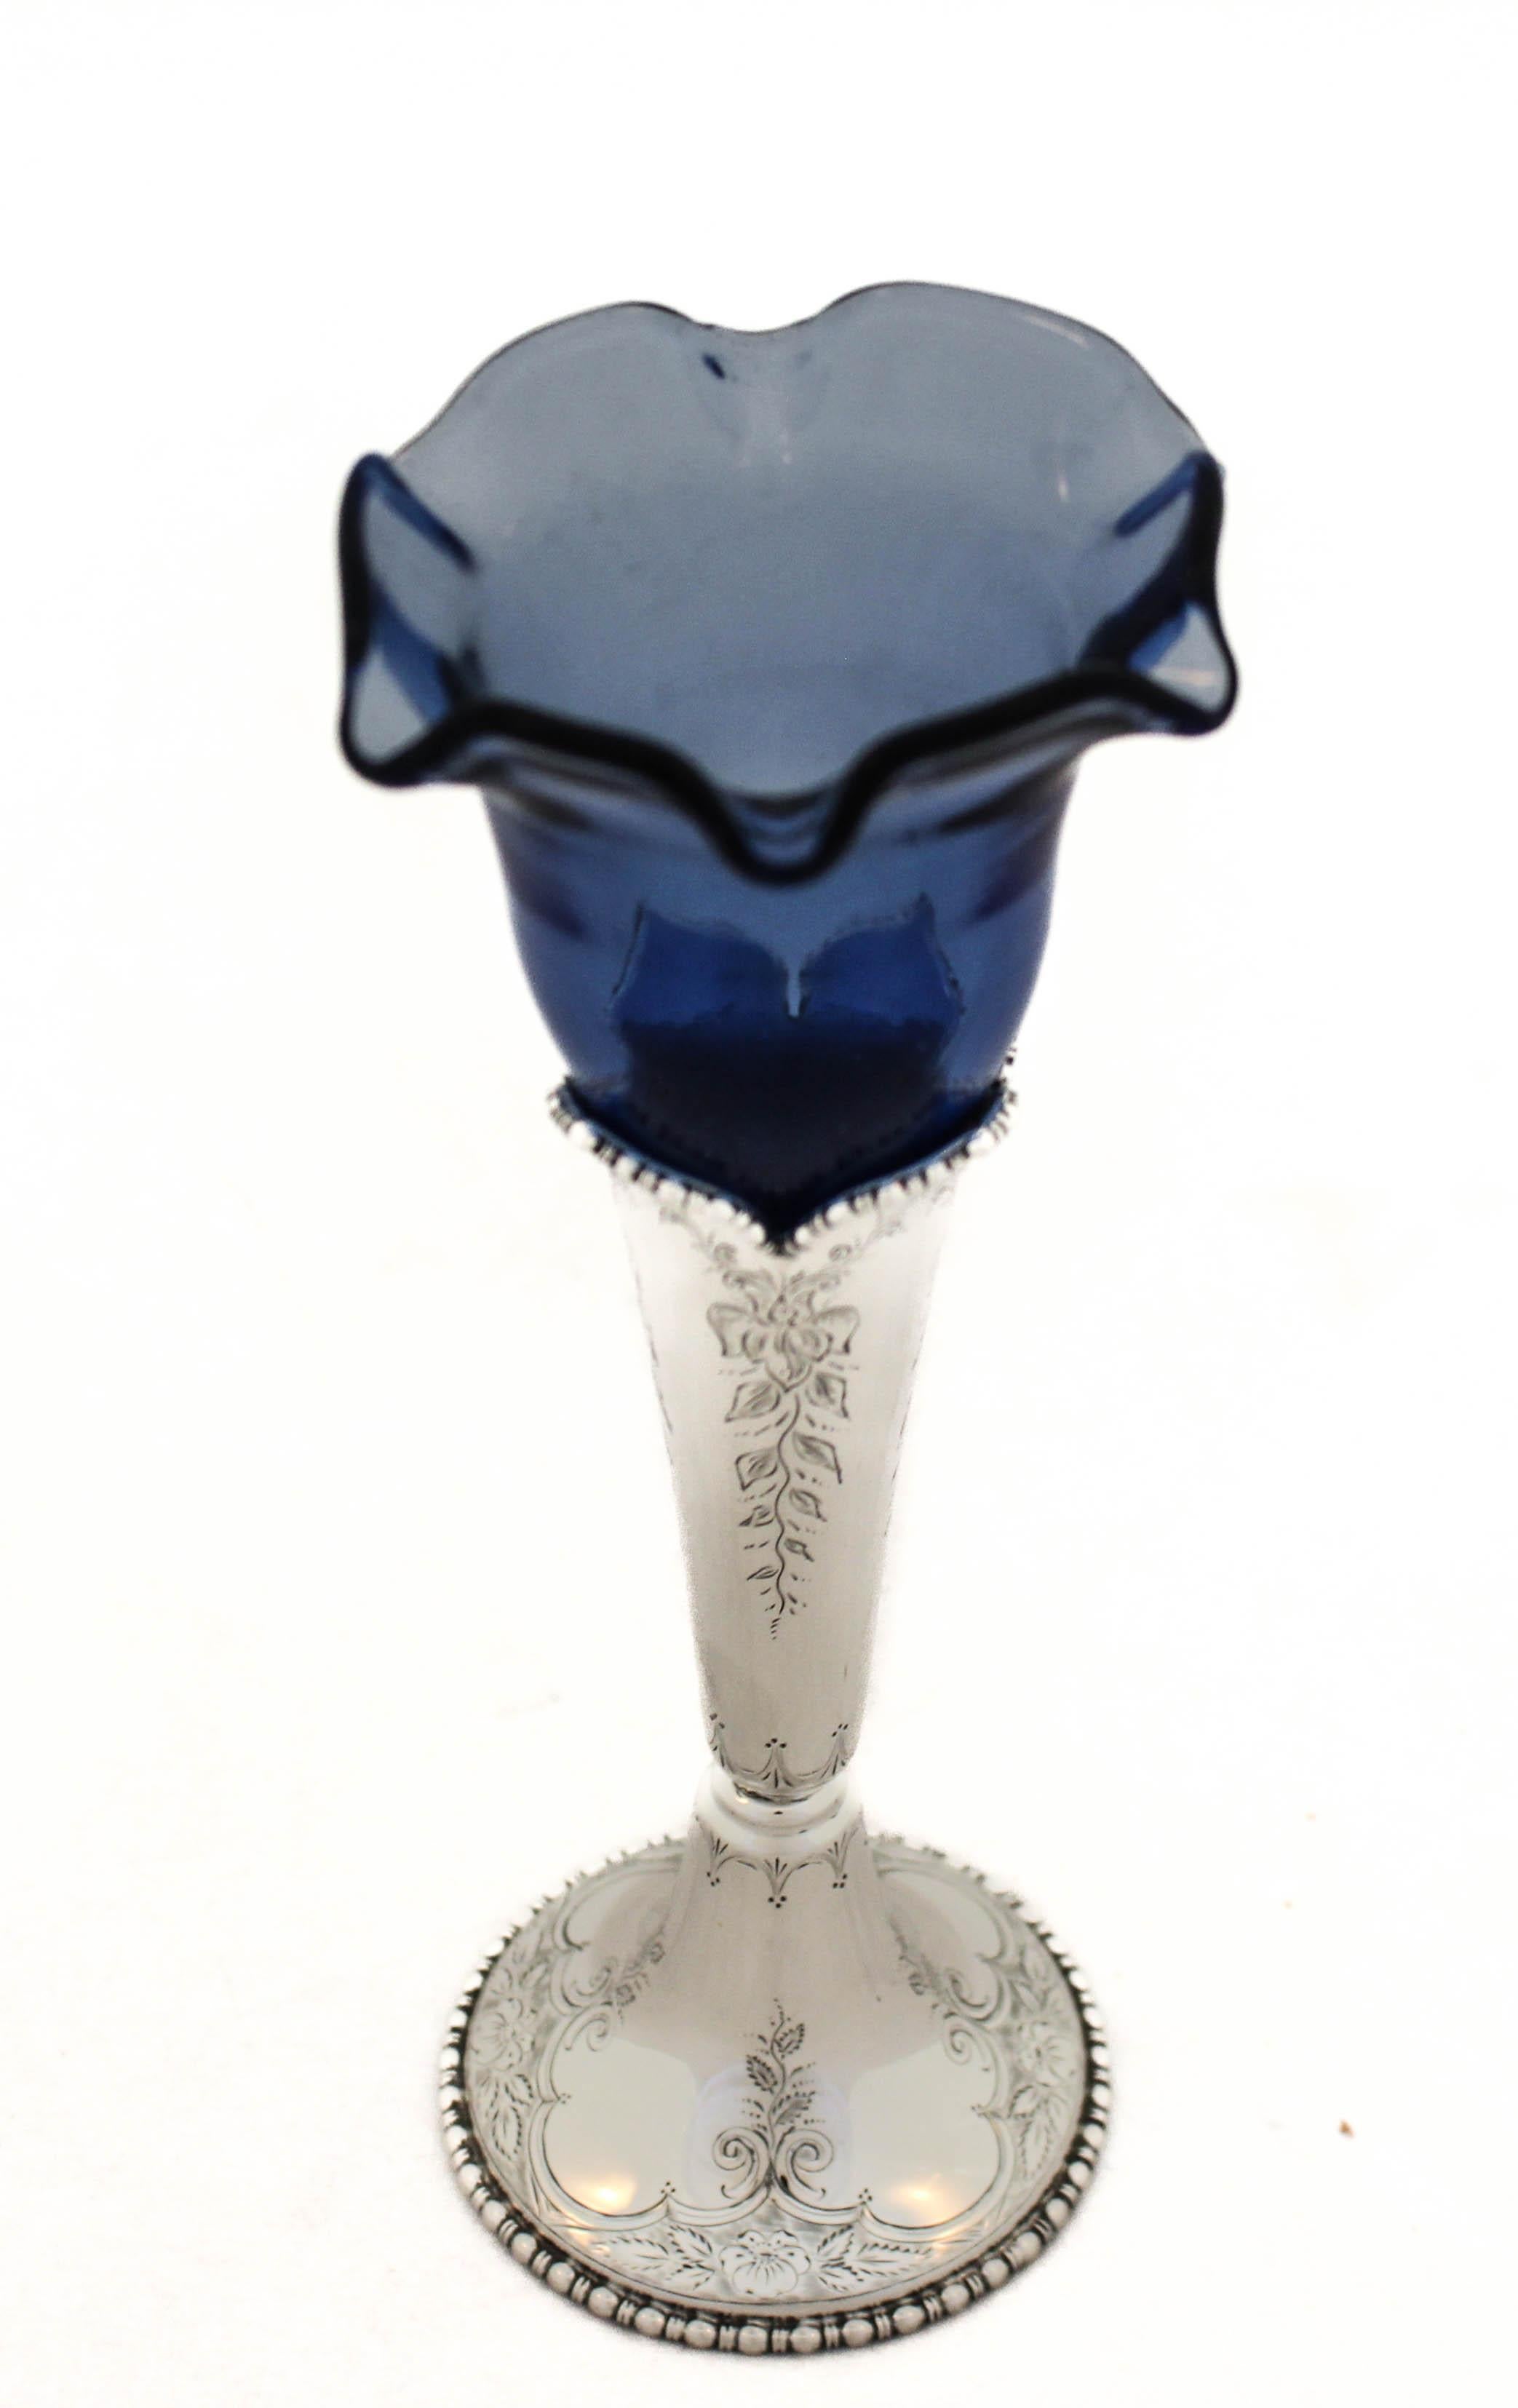 Being offered is a sterling silver vase by Black Starr and Frost with a glass liner.  The silver part has an etched design around the base as well as the body with a hand engraved script monogram in the center.  The blue glass liner is scalloped